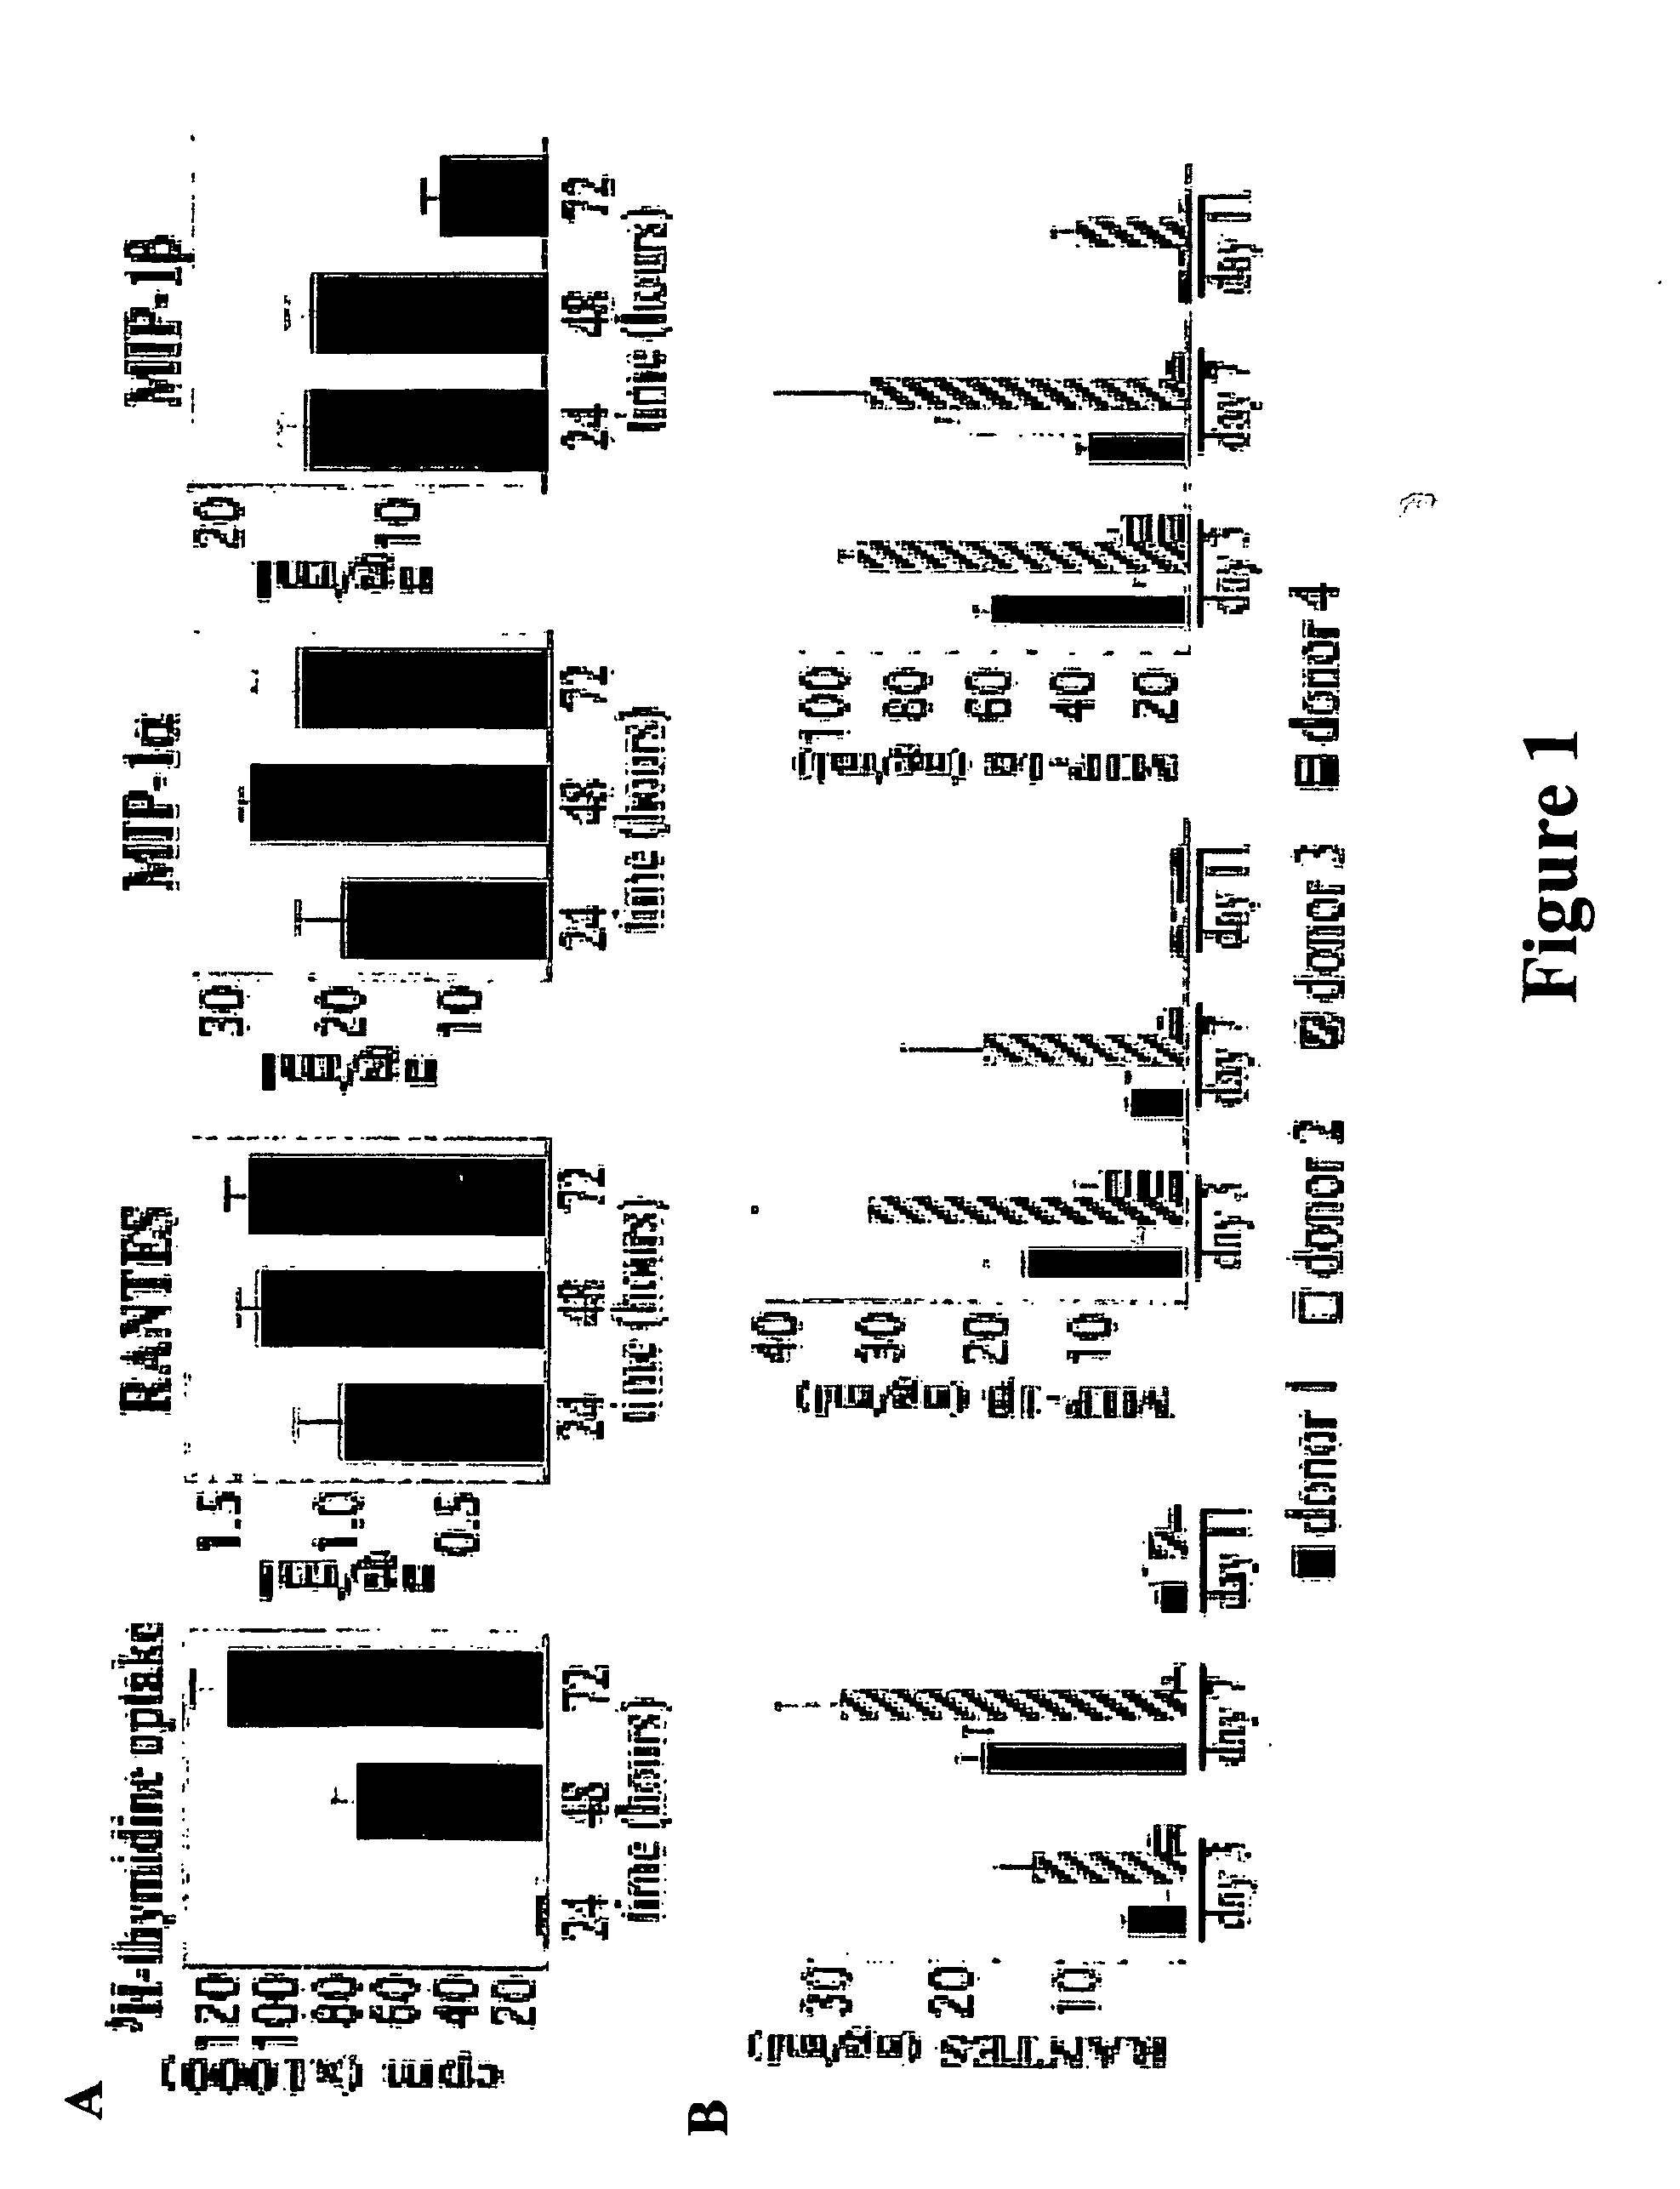 Compositions for inducing increased levels of beta-chemokines and methods of use therefor